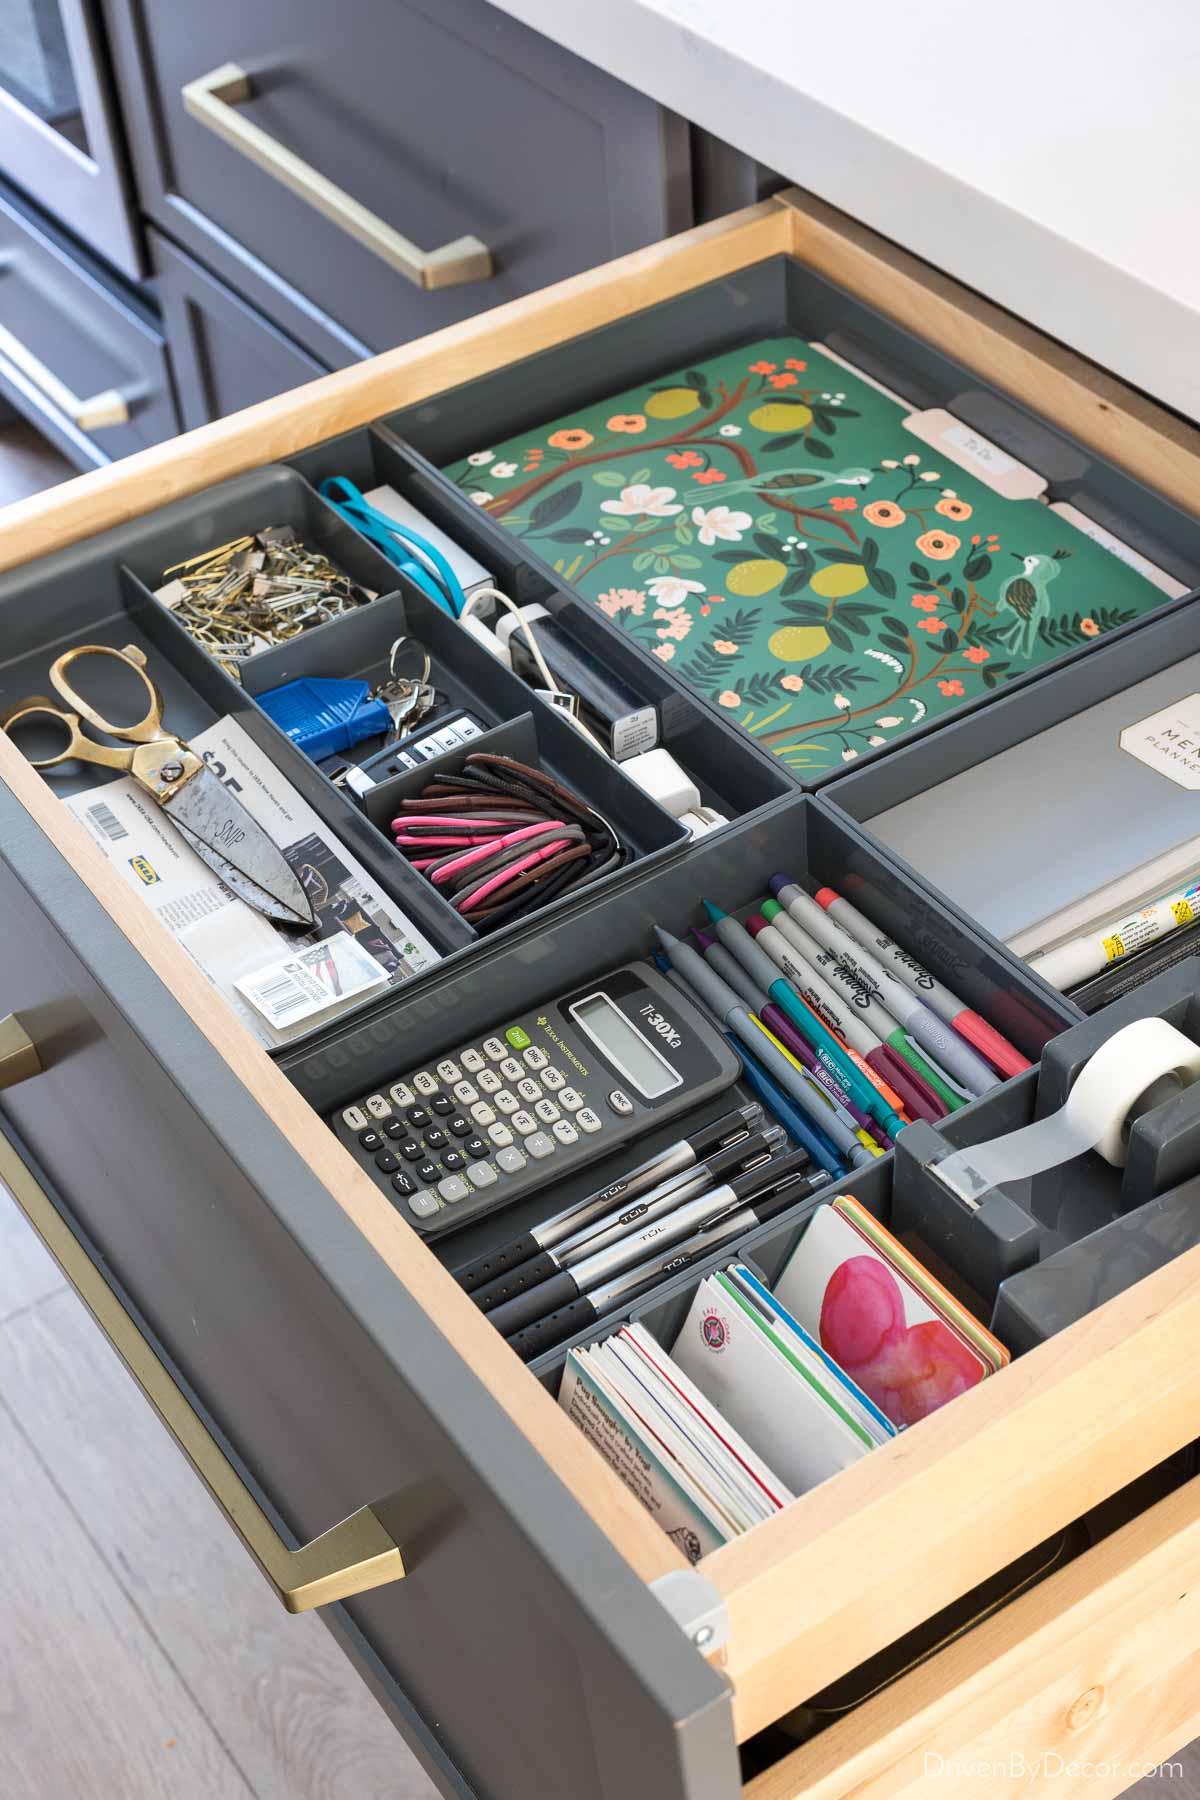 These Poppin organizers are perfect for getting desk and kitchen drawers organized!